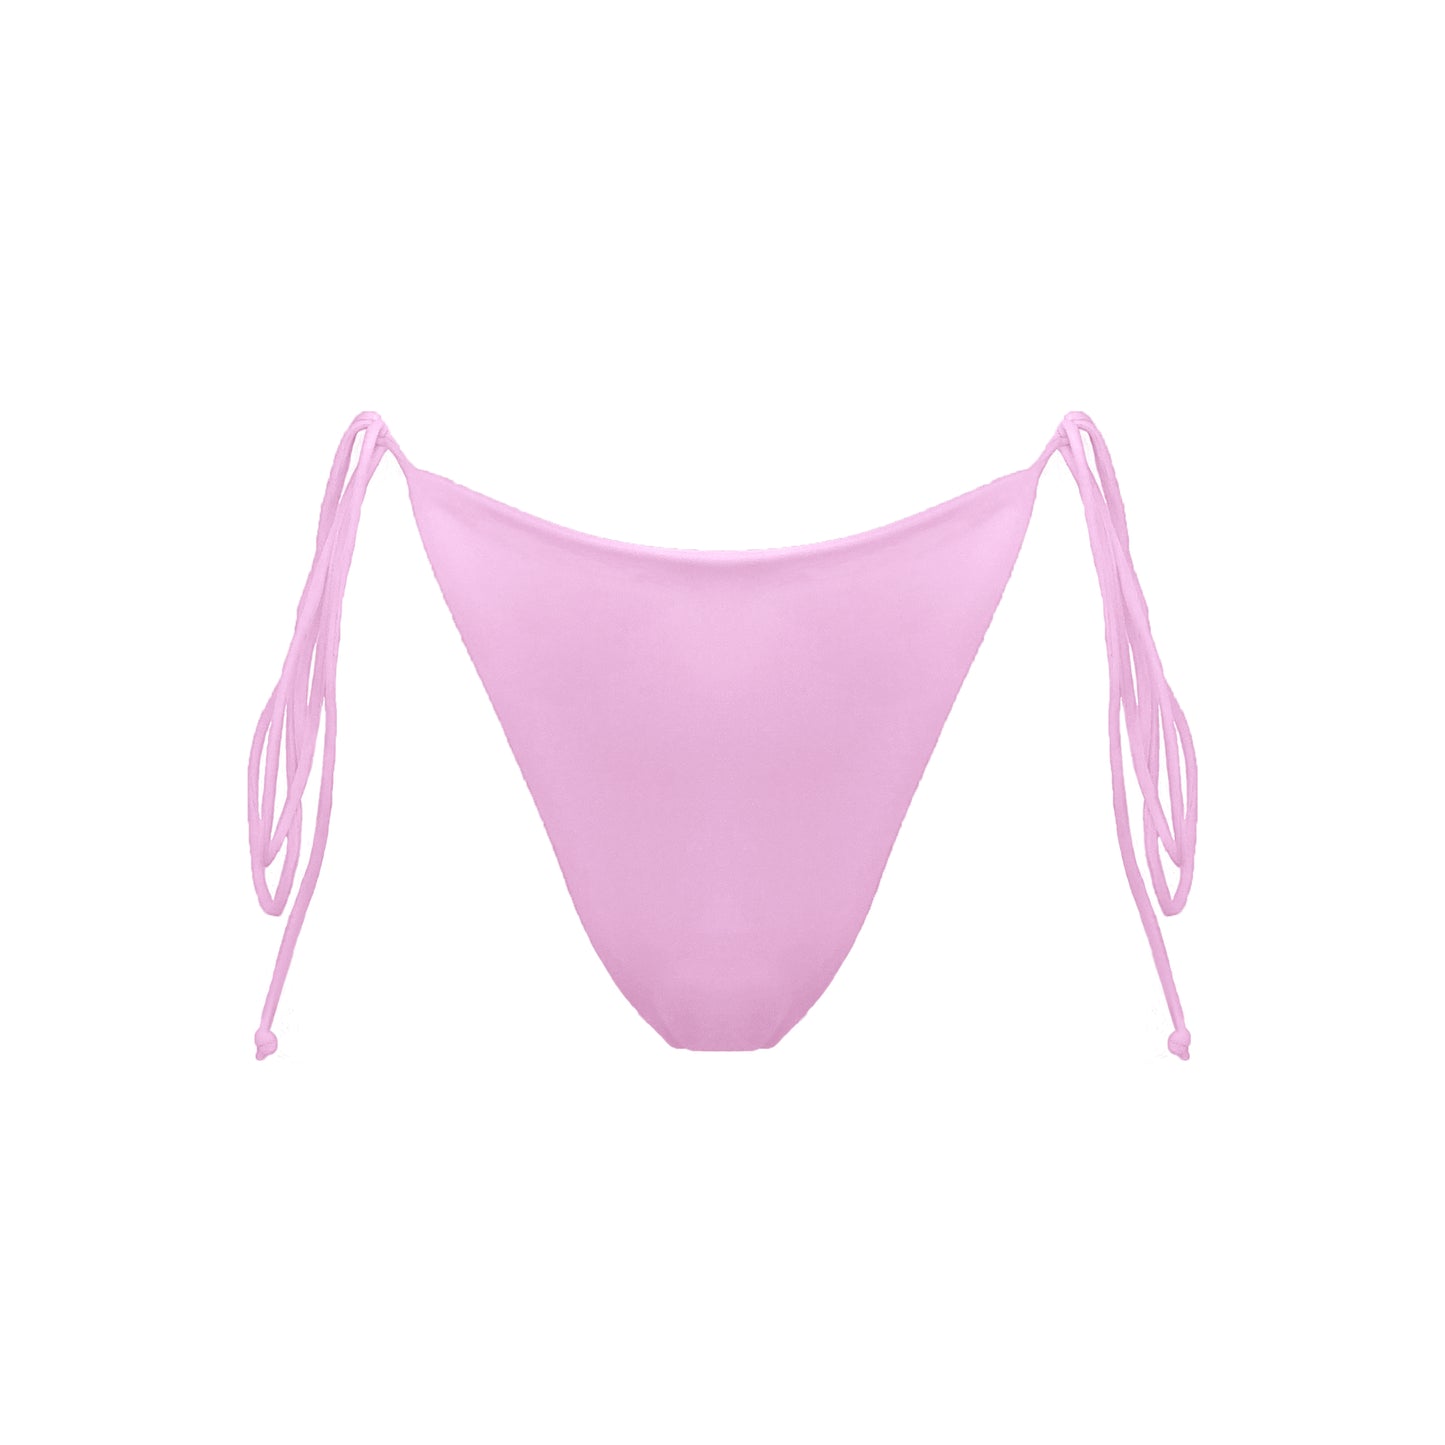 Pastel pink Ravello bikini bottom with adjustable side tie straps and cheeky bum coverage.